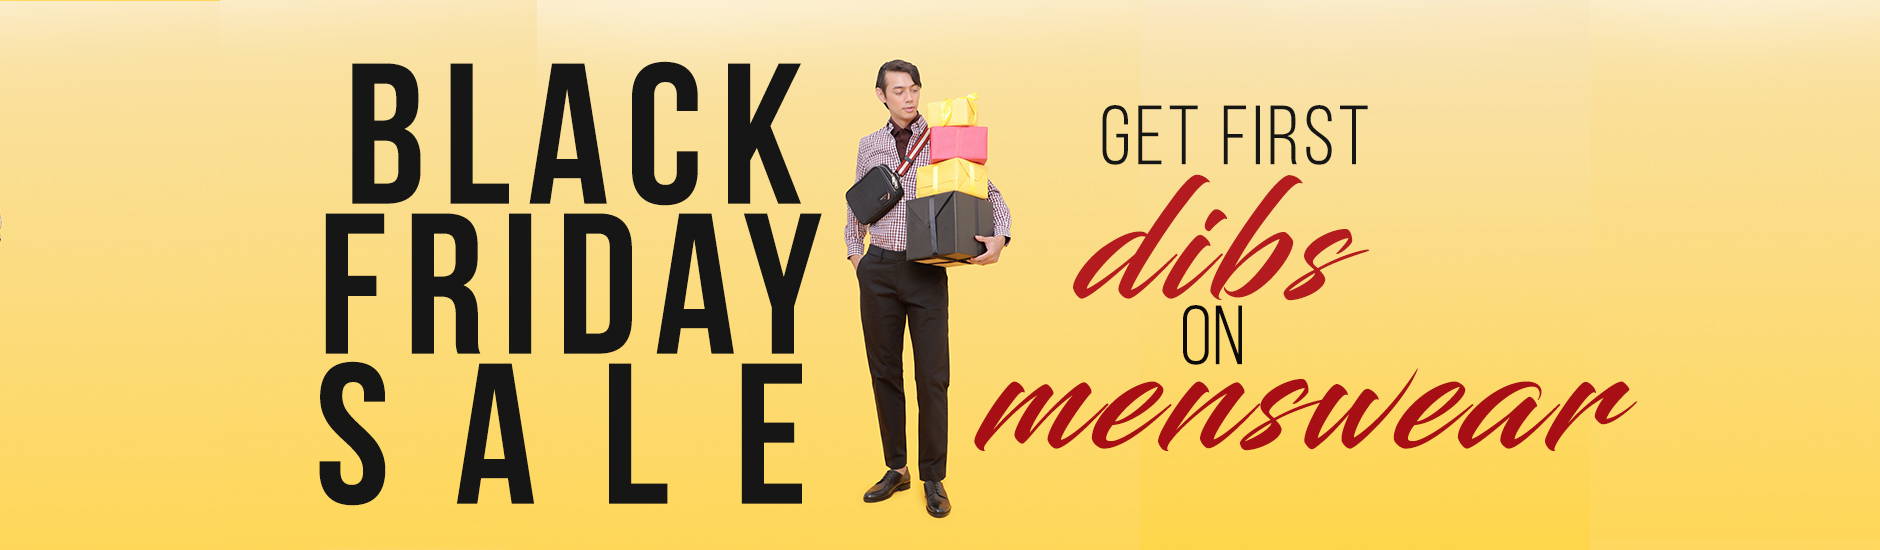 Get First Dibs on Menswear on Black Friday